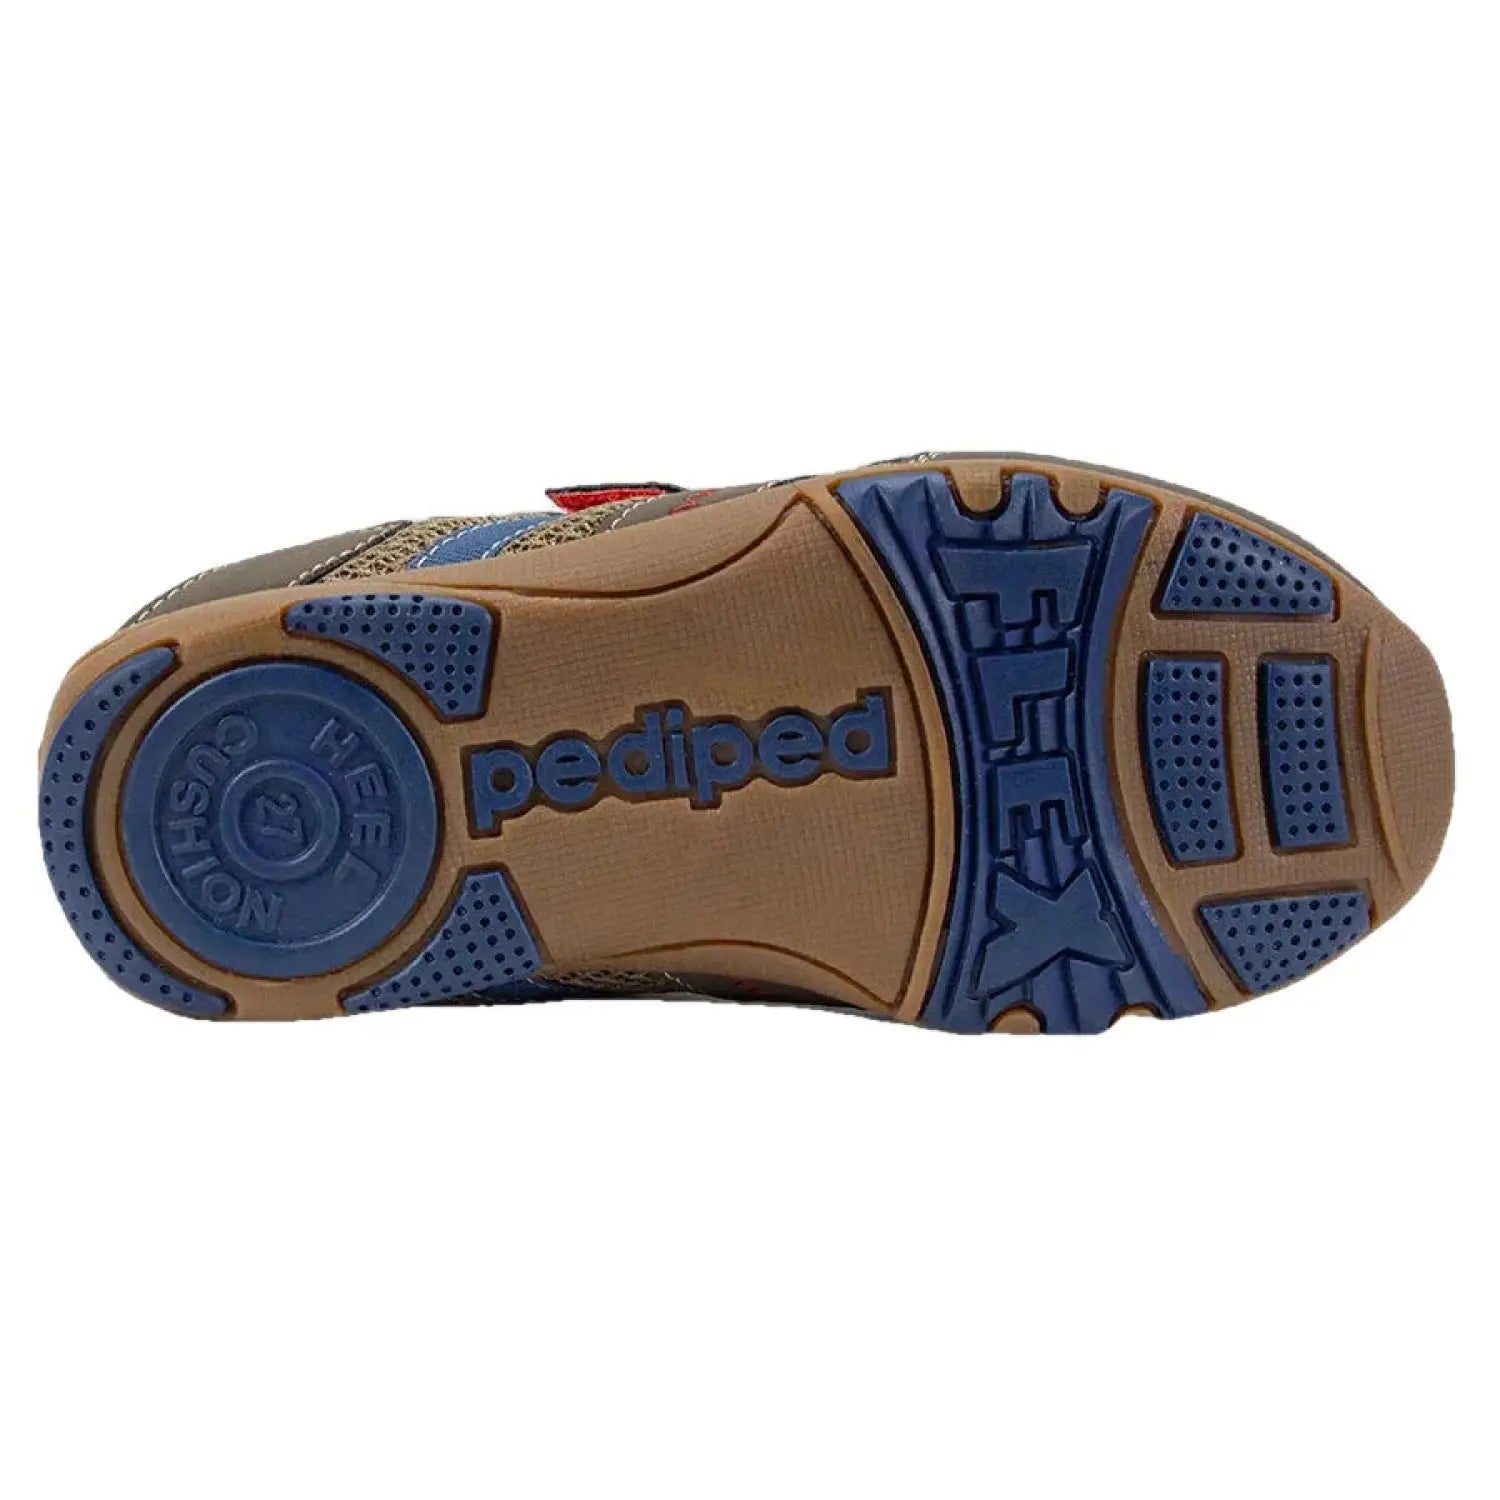 Pediped Flex® Gehrig Kids Shoes shown in Earth - sole view. Brown and blue accent colors. 